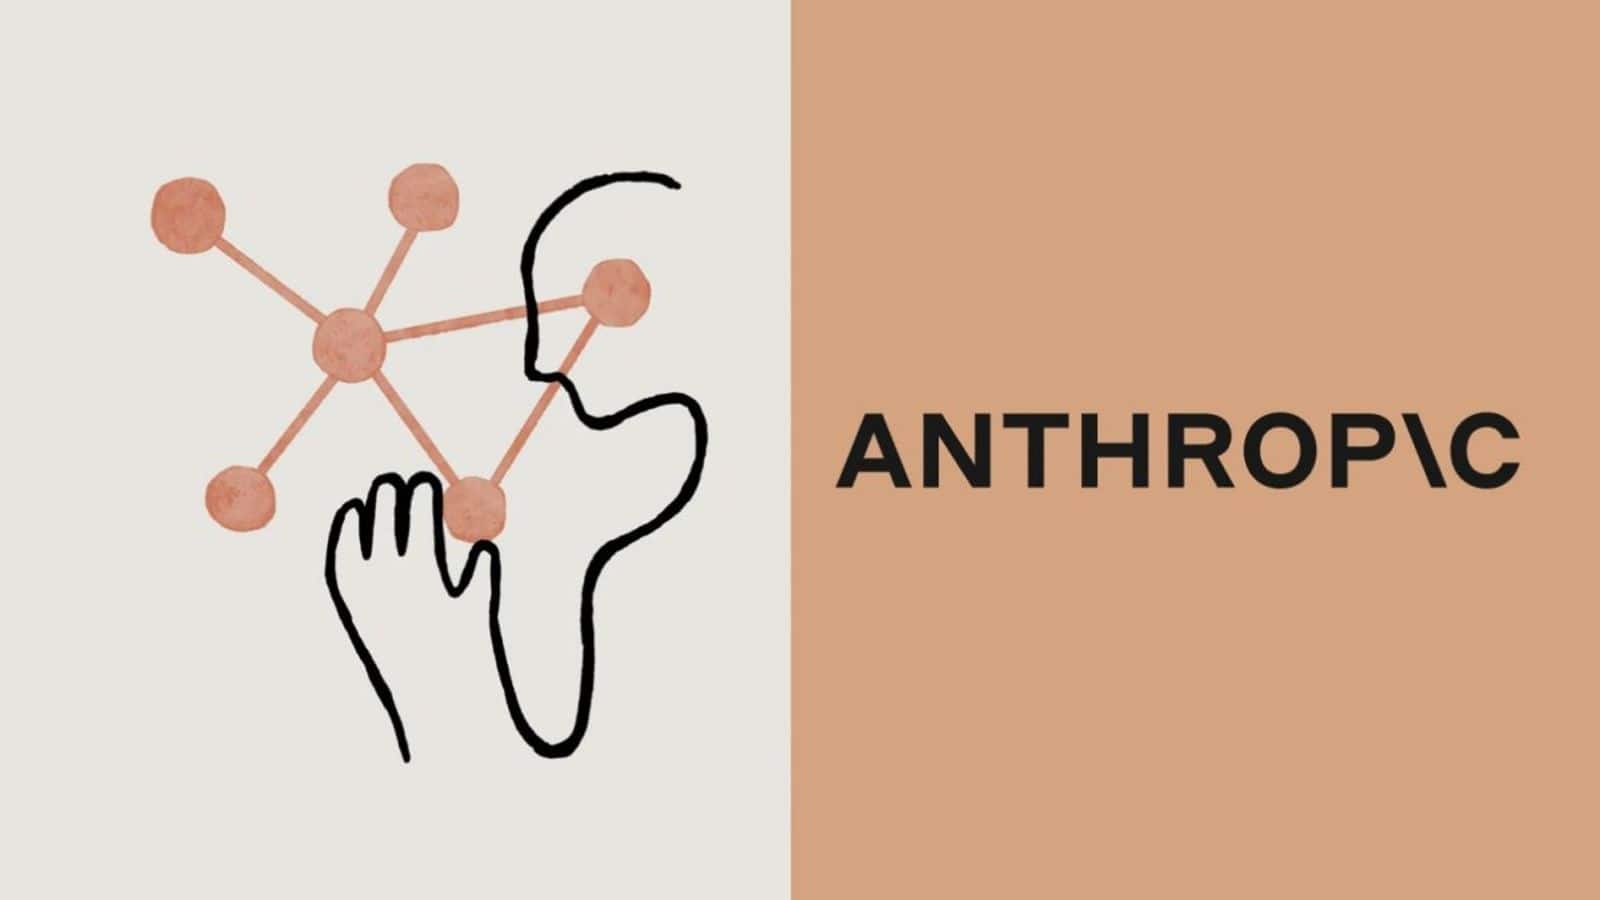 Anthropic opens its AI tech to minors with safety provisions